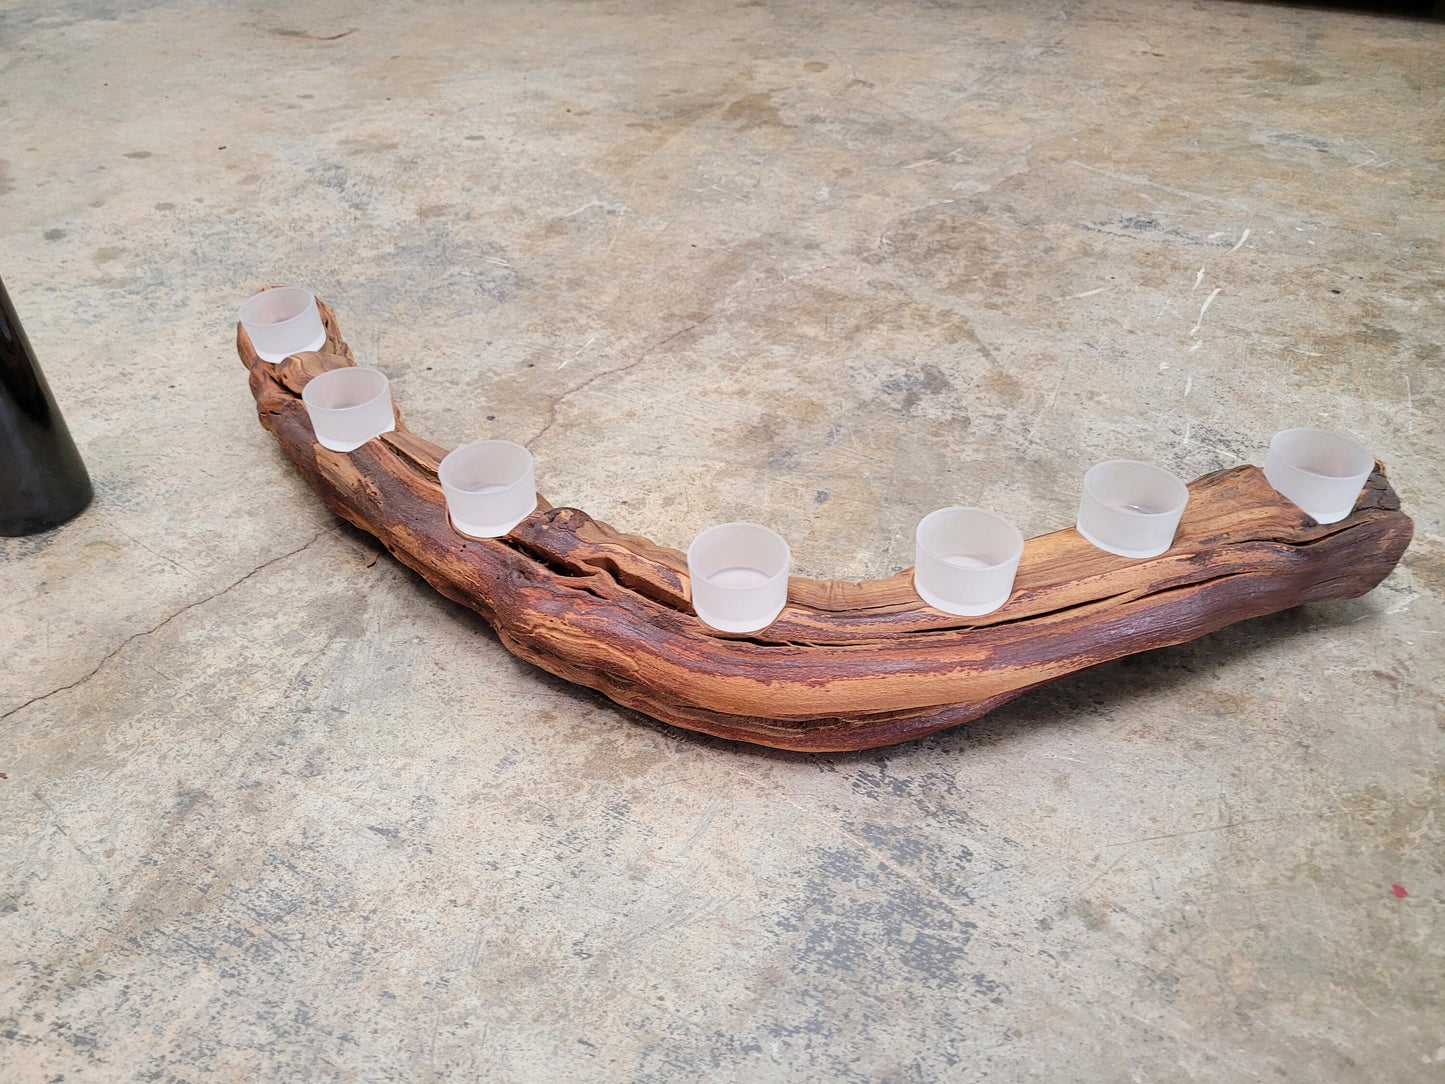 Grapevine Candle Holder 100121-4 Retired Justin Winery Cabernet California grapevines. 100% Recycled!